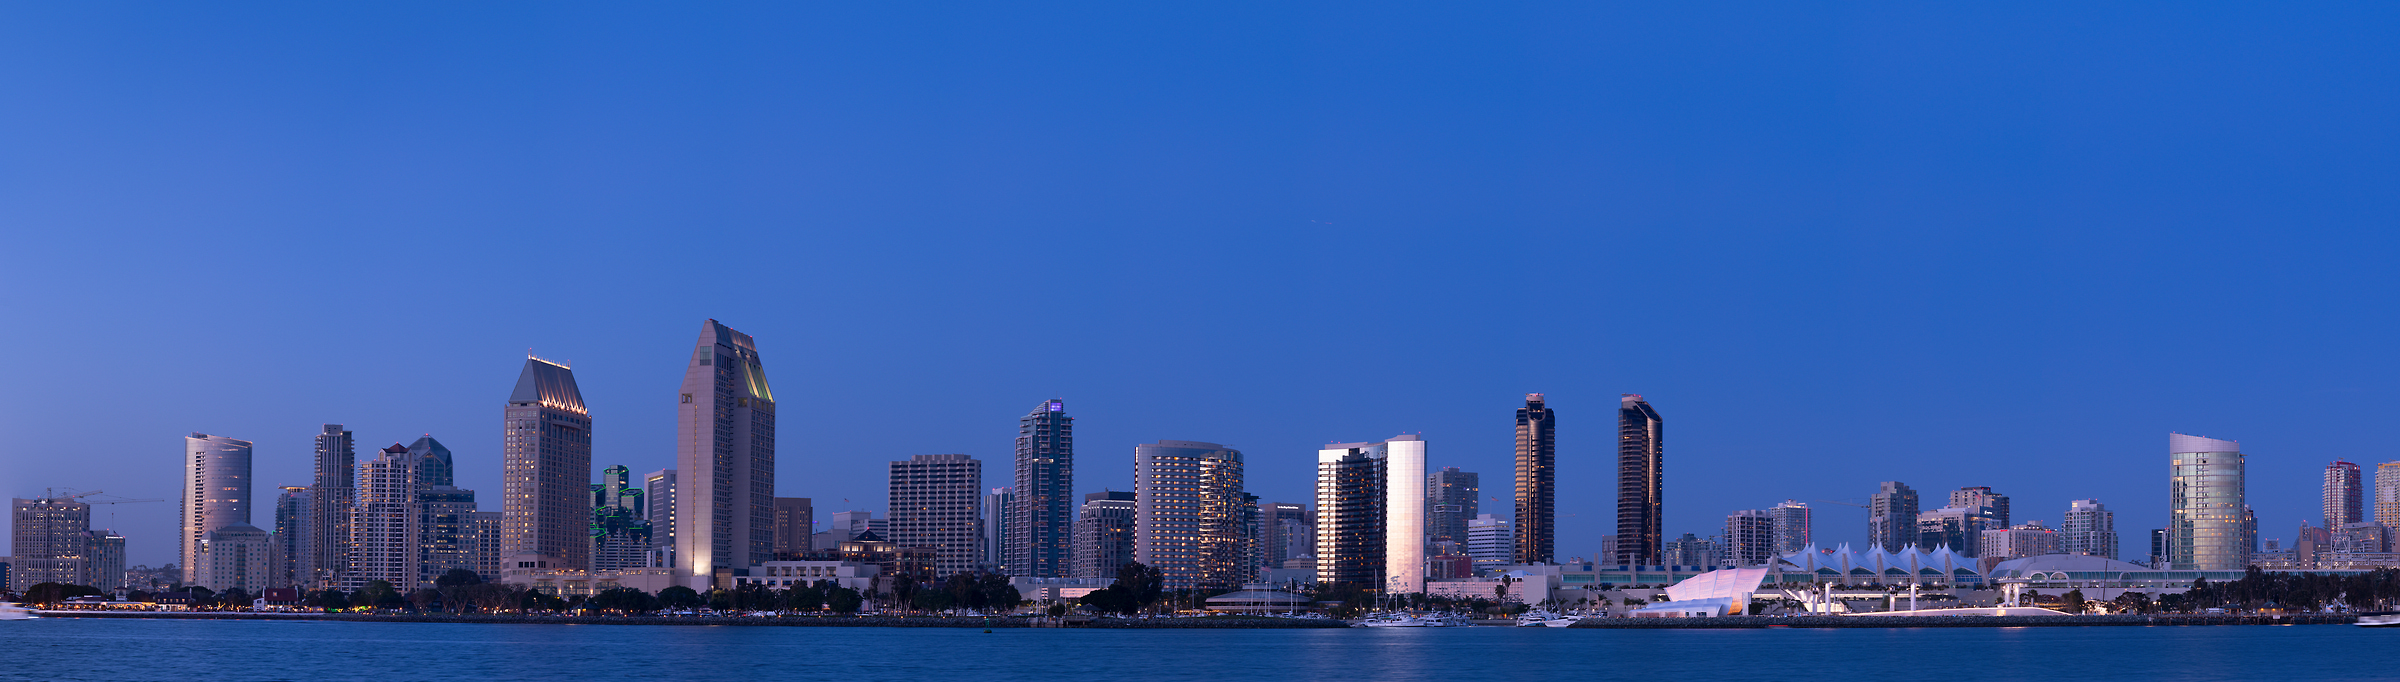 344 megapixels! A very high resolution, large-format VAST photo print of the San Diego skyline at evening; cityscape photograph created by Greg Probst in San Diego, California.